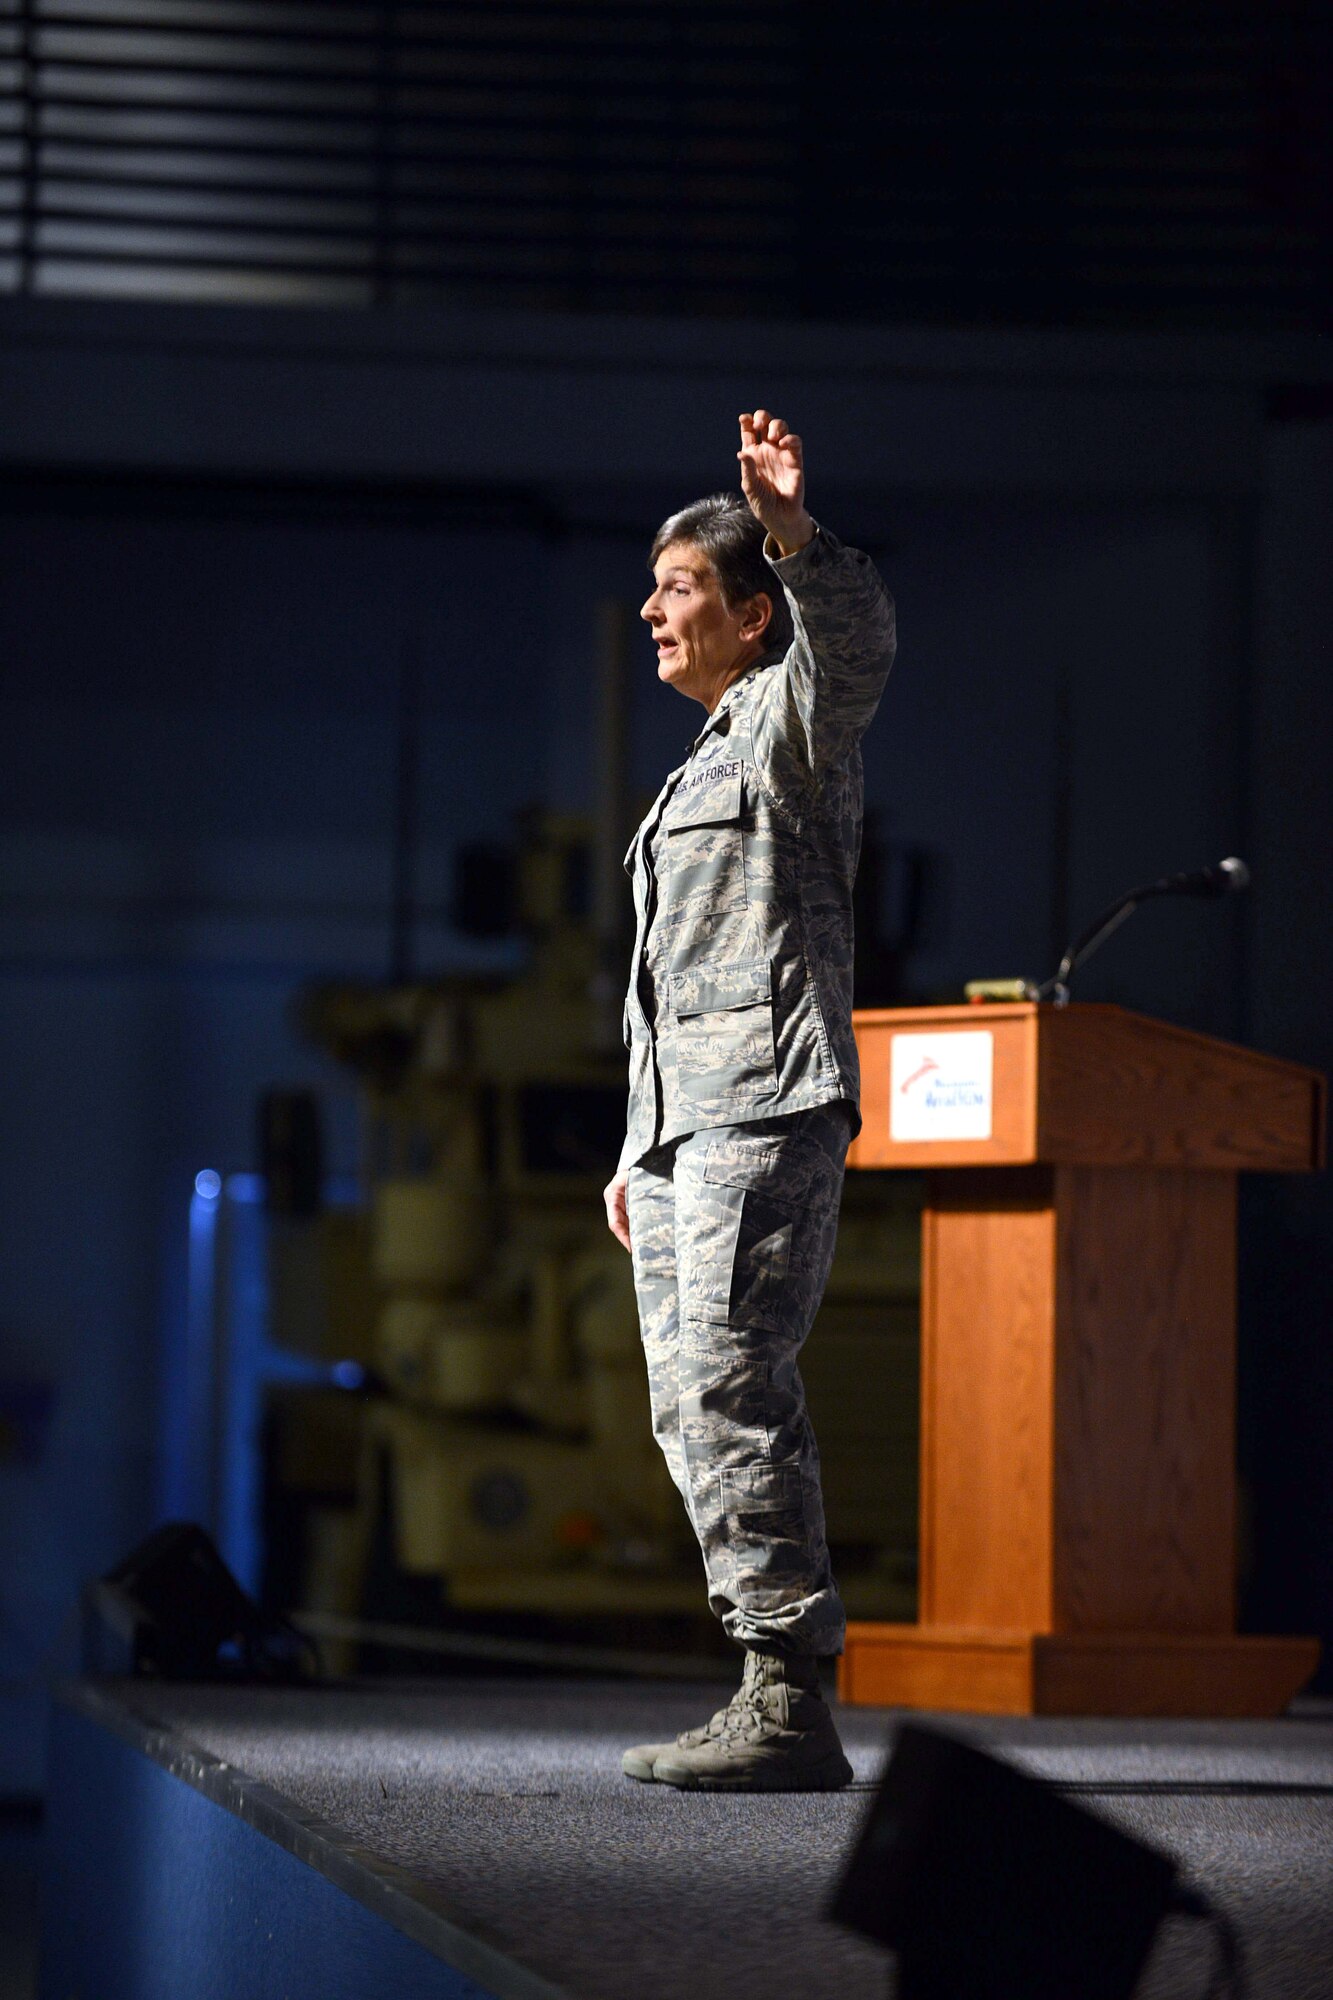 Gen. Ellen Pawlikowski, Air Force Materiel Command commander, speaks to members of Team Robins during her commanders call at the Museum of Aviation Century of Flight Hangar Jan. 18, 2017. During the commanders call, the general discussed the AFMC Strategic Plan, released in 2016, which established the following four goals: Increase AFMC's agility in order to best support the Air Force enterprise; Bolster trust and confidence of those AFMC serves; Drive cost-effectiveness into the capabilities the command provides; and, Recruit, develop and retain a diverse, high-performing and resilient team. In closing the general told the audience, "Thanks for what you do. It makes me proud to be a part of Air Force Materiel Command." (U.S. Air Force photo by Tommie Horton)